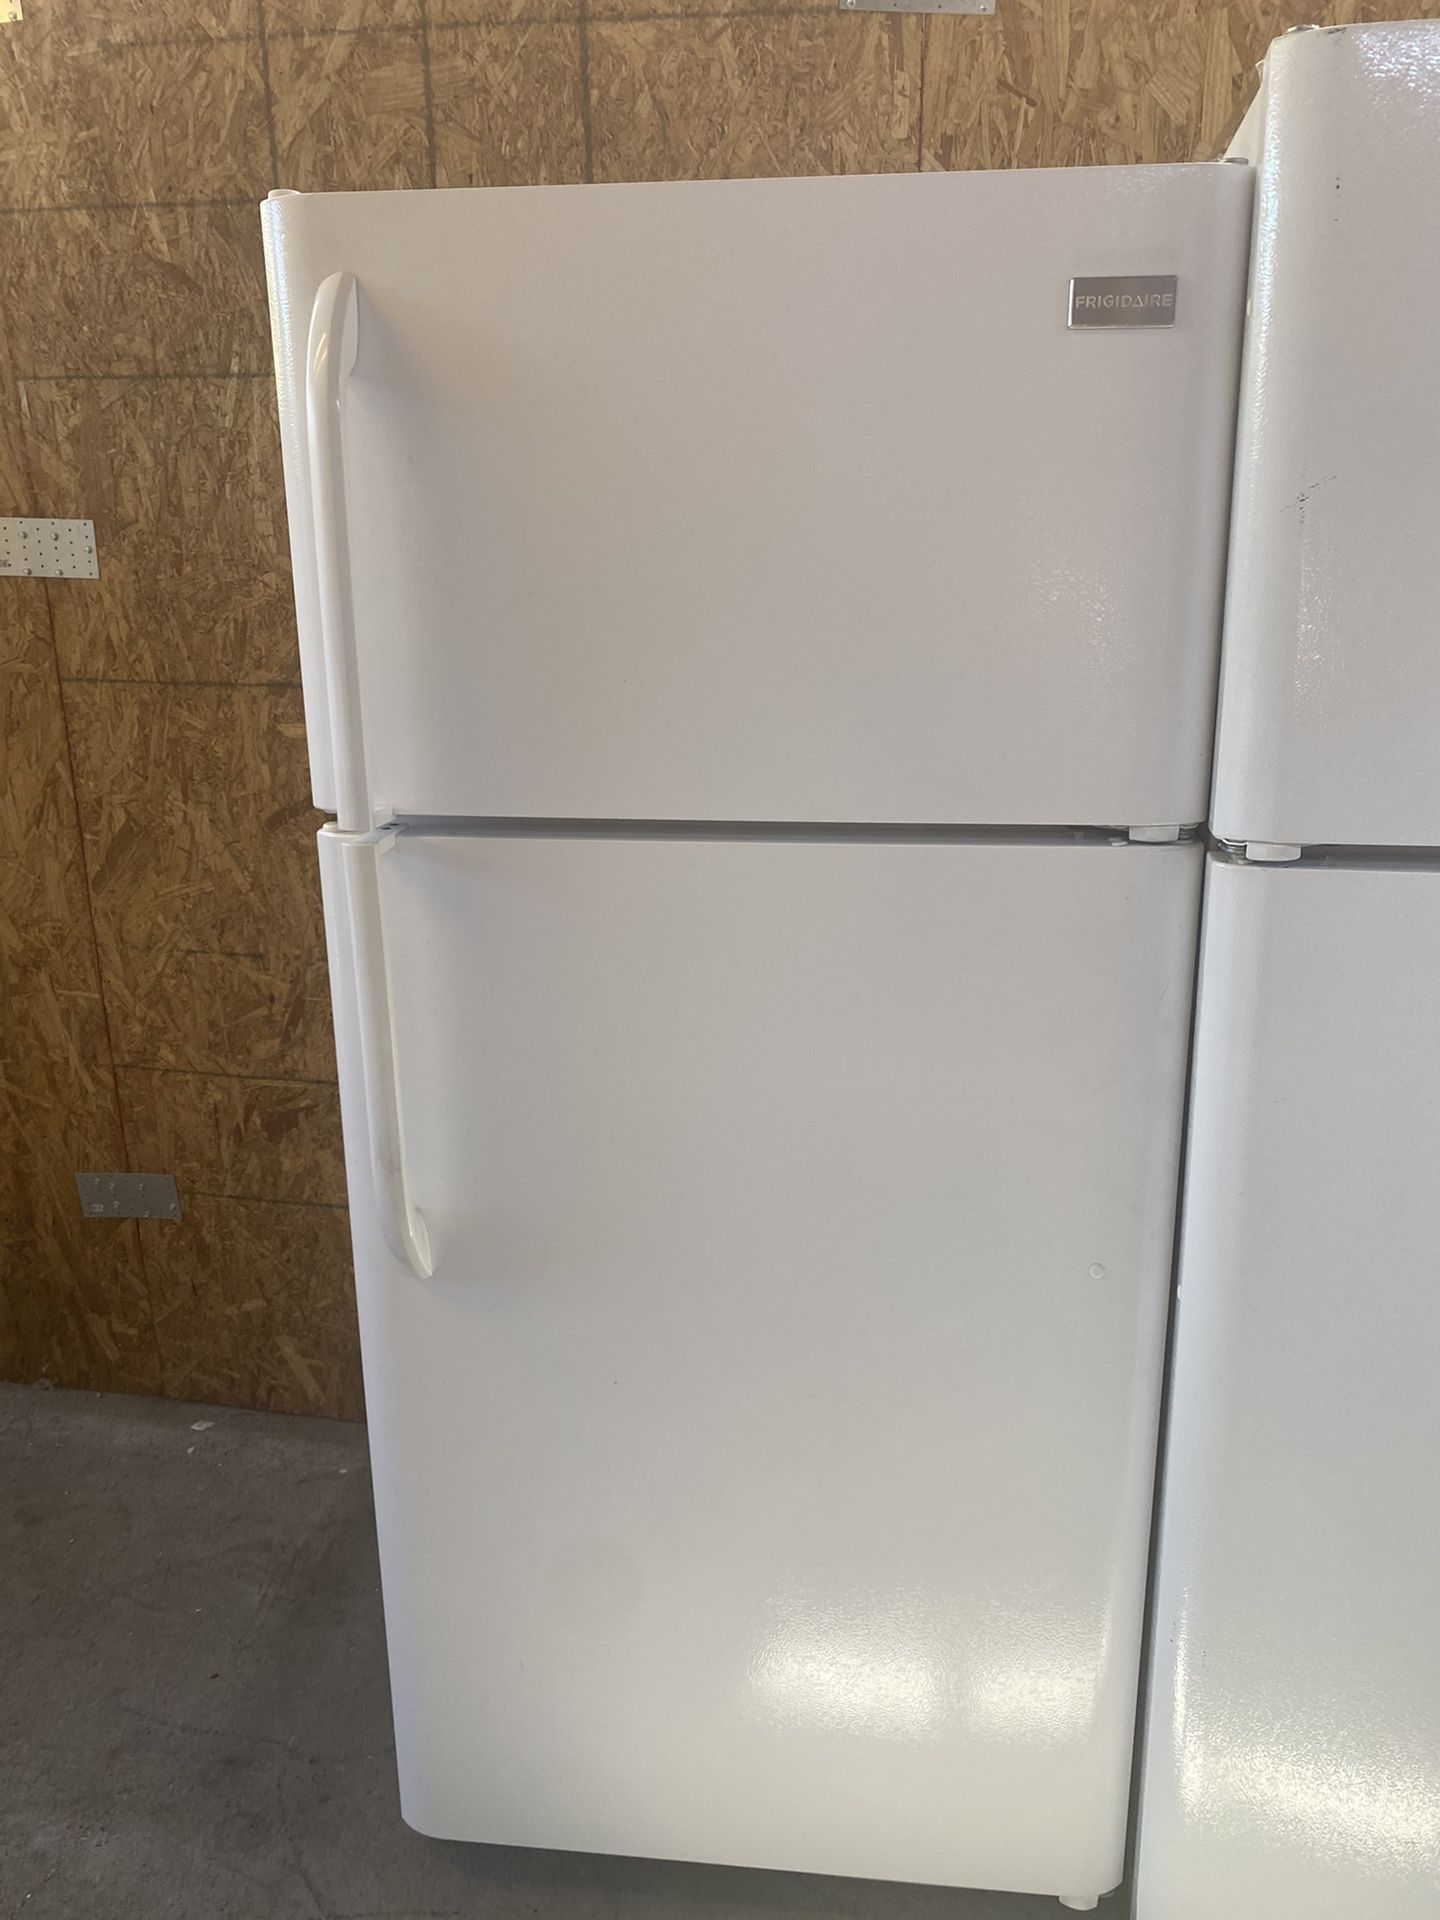 $249 Frigidaire white 18 cubic refrigerator with delivery in the San Fernando Valley